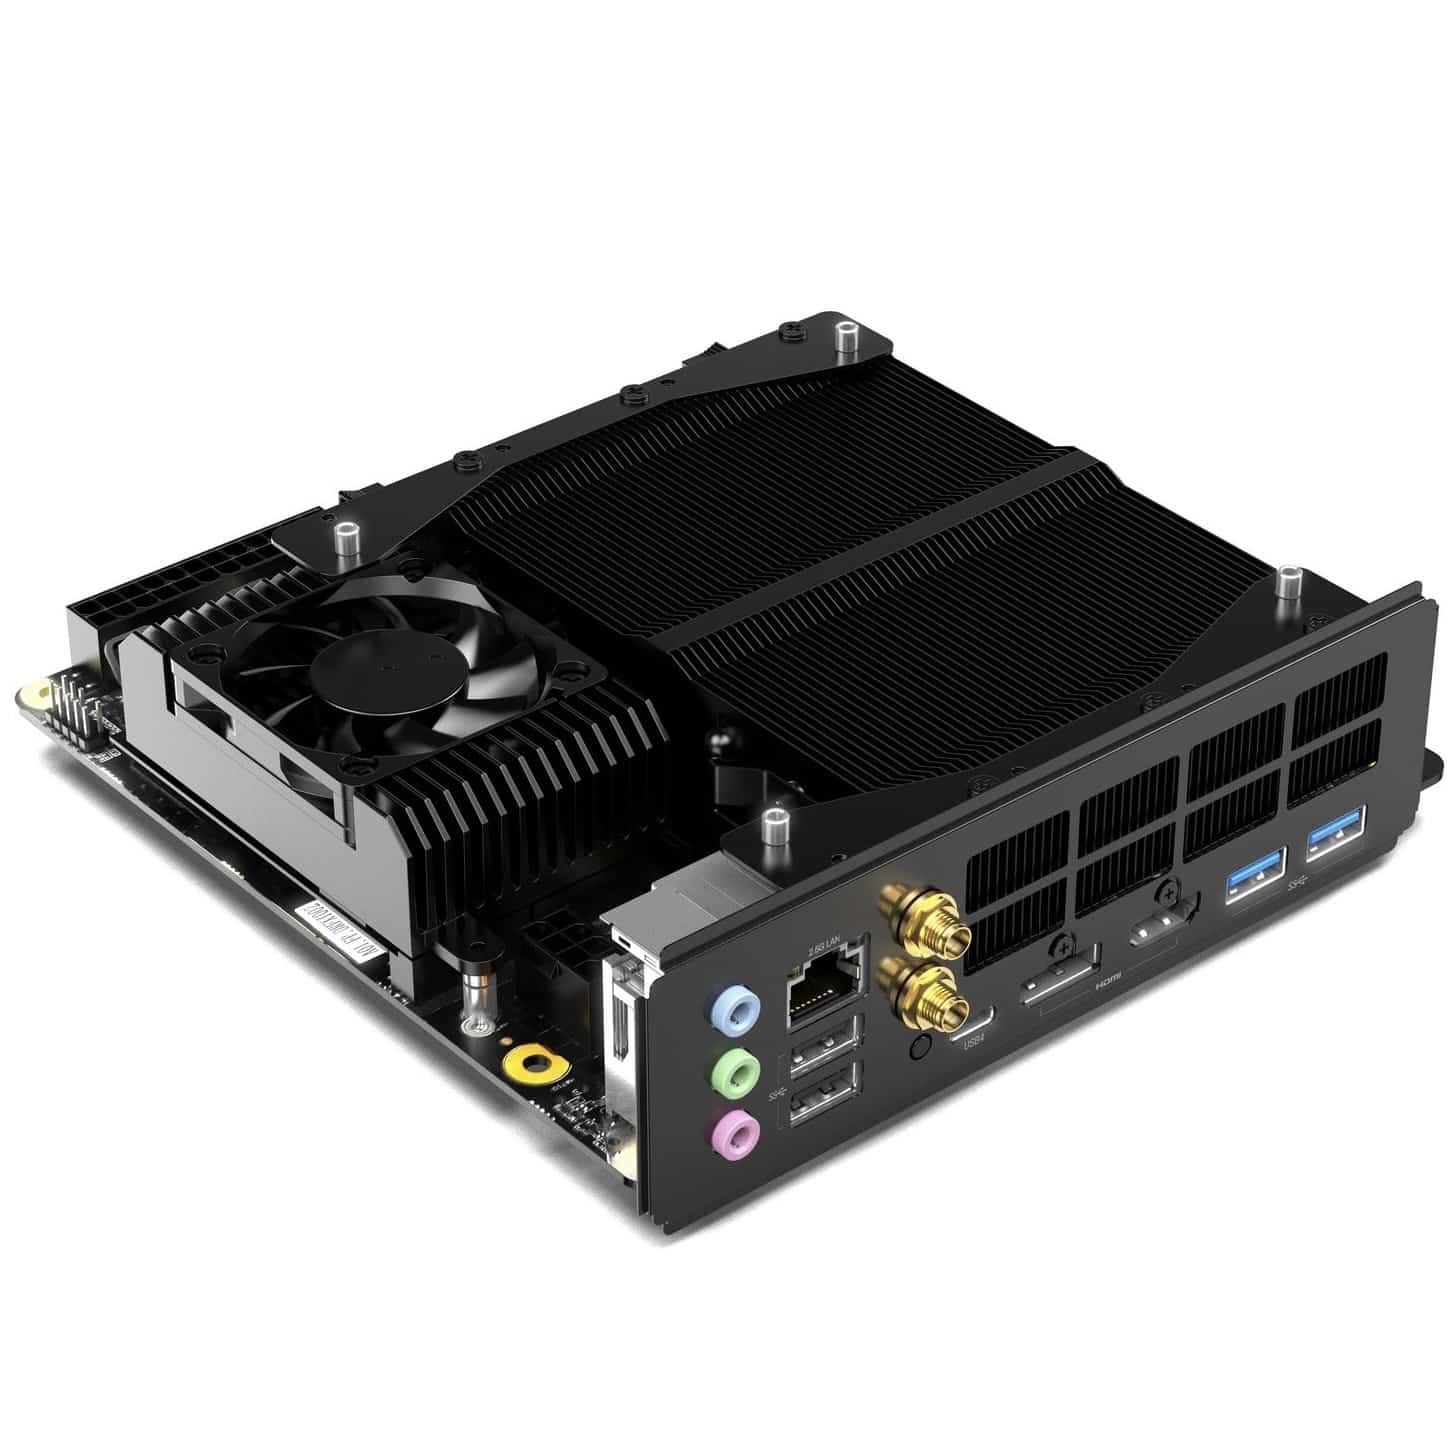 MINISFORUM launches BD770i mini-ITX motherboard with integrated